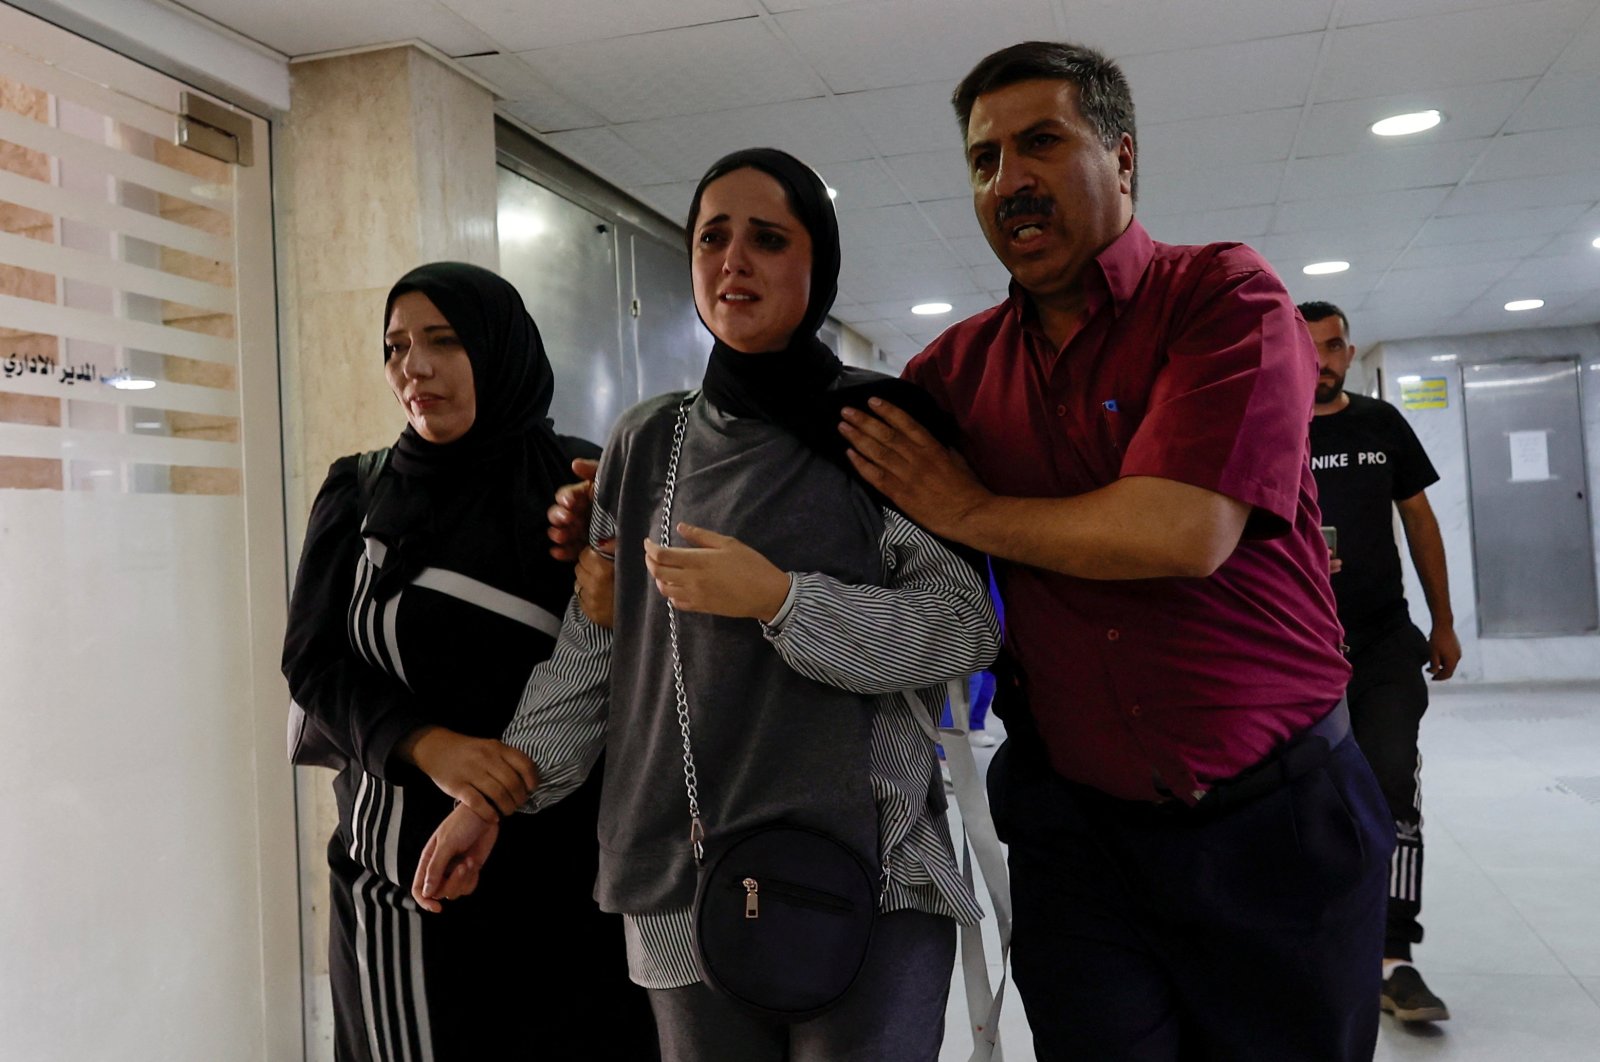 People react at a hospital after a Palestinian woman was killed in an incident at an Israeli checkpoint in Hebron, occupied West Bank, Palestine, June 1, 2022. (Reuters Photo)